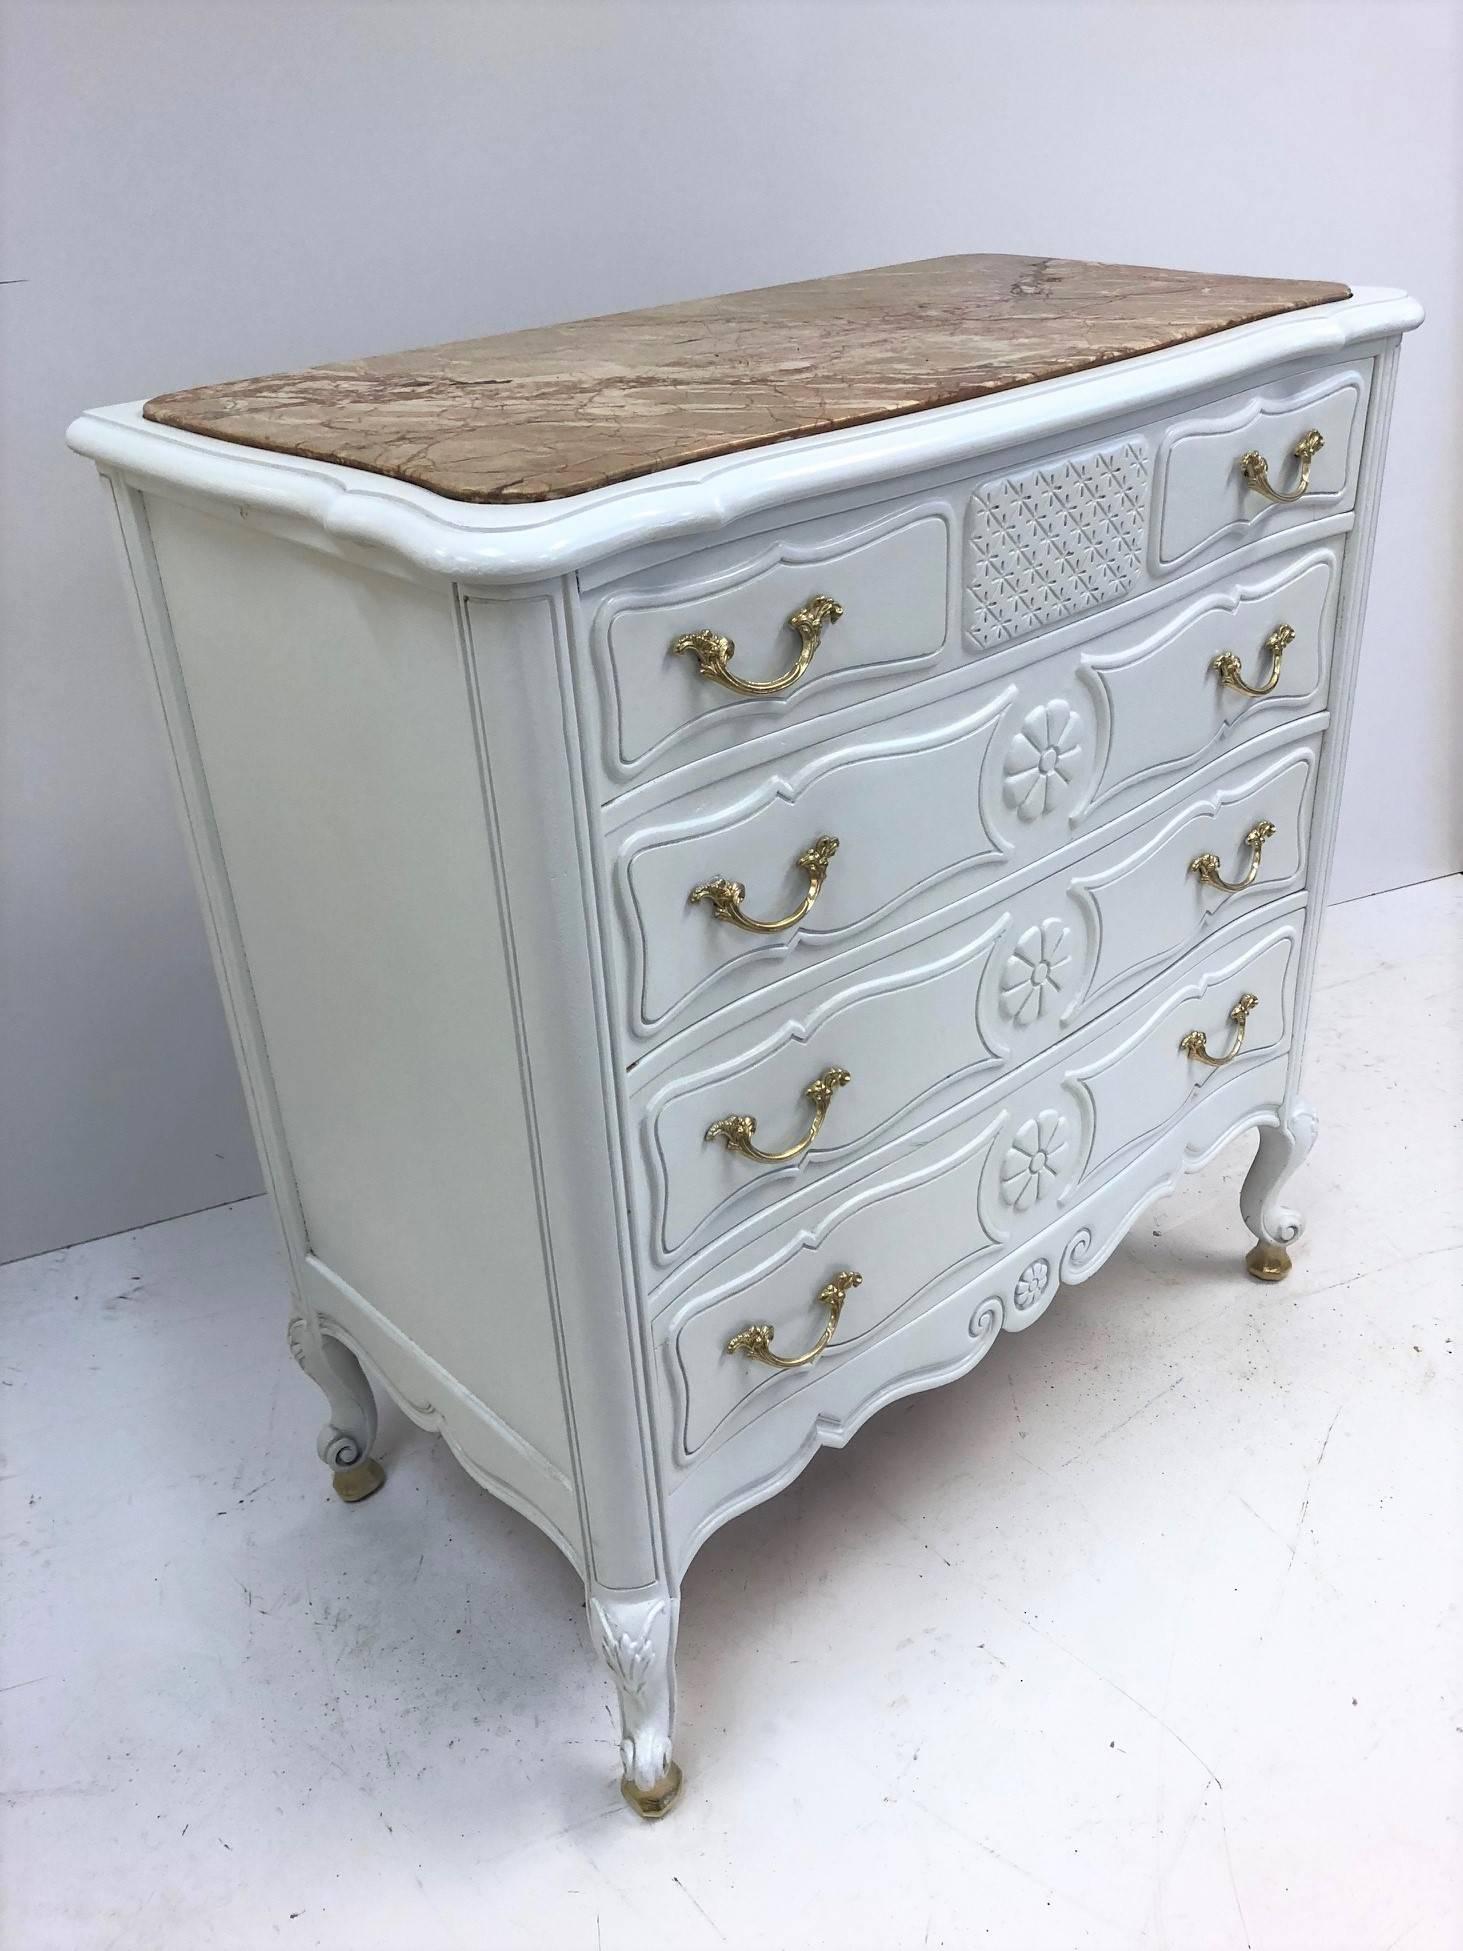 Pair of French antique style marble-top chests with a white painted finish. Each chest have four pull out drawers, marble tops with gold handles and feet.